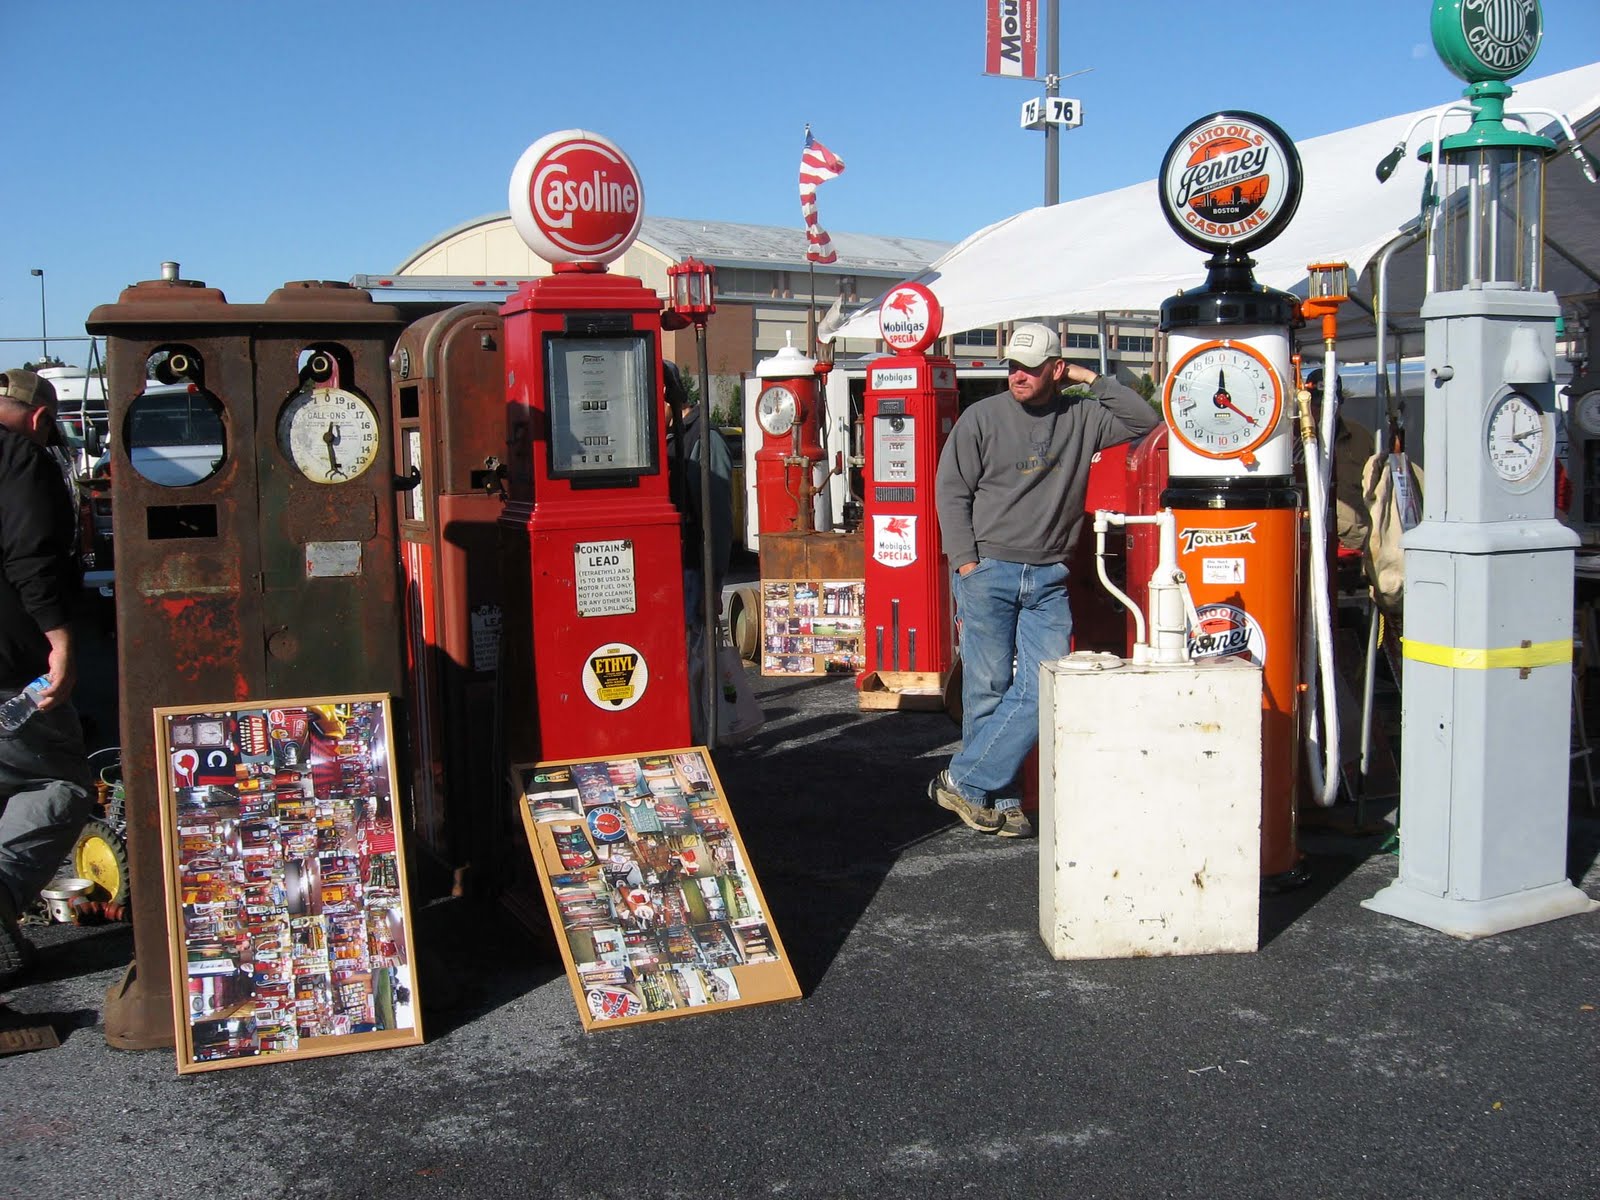 Fountainhead Antique Auto Museum: Tips for the 2011 Hershey Swap Meet